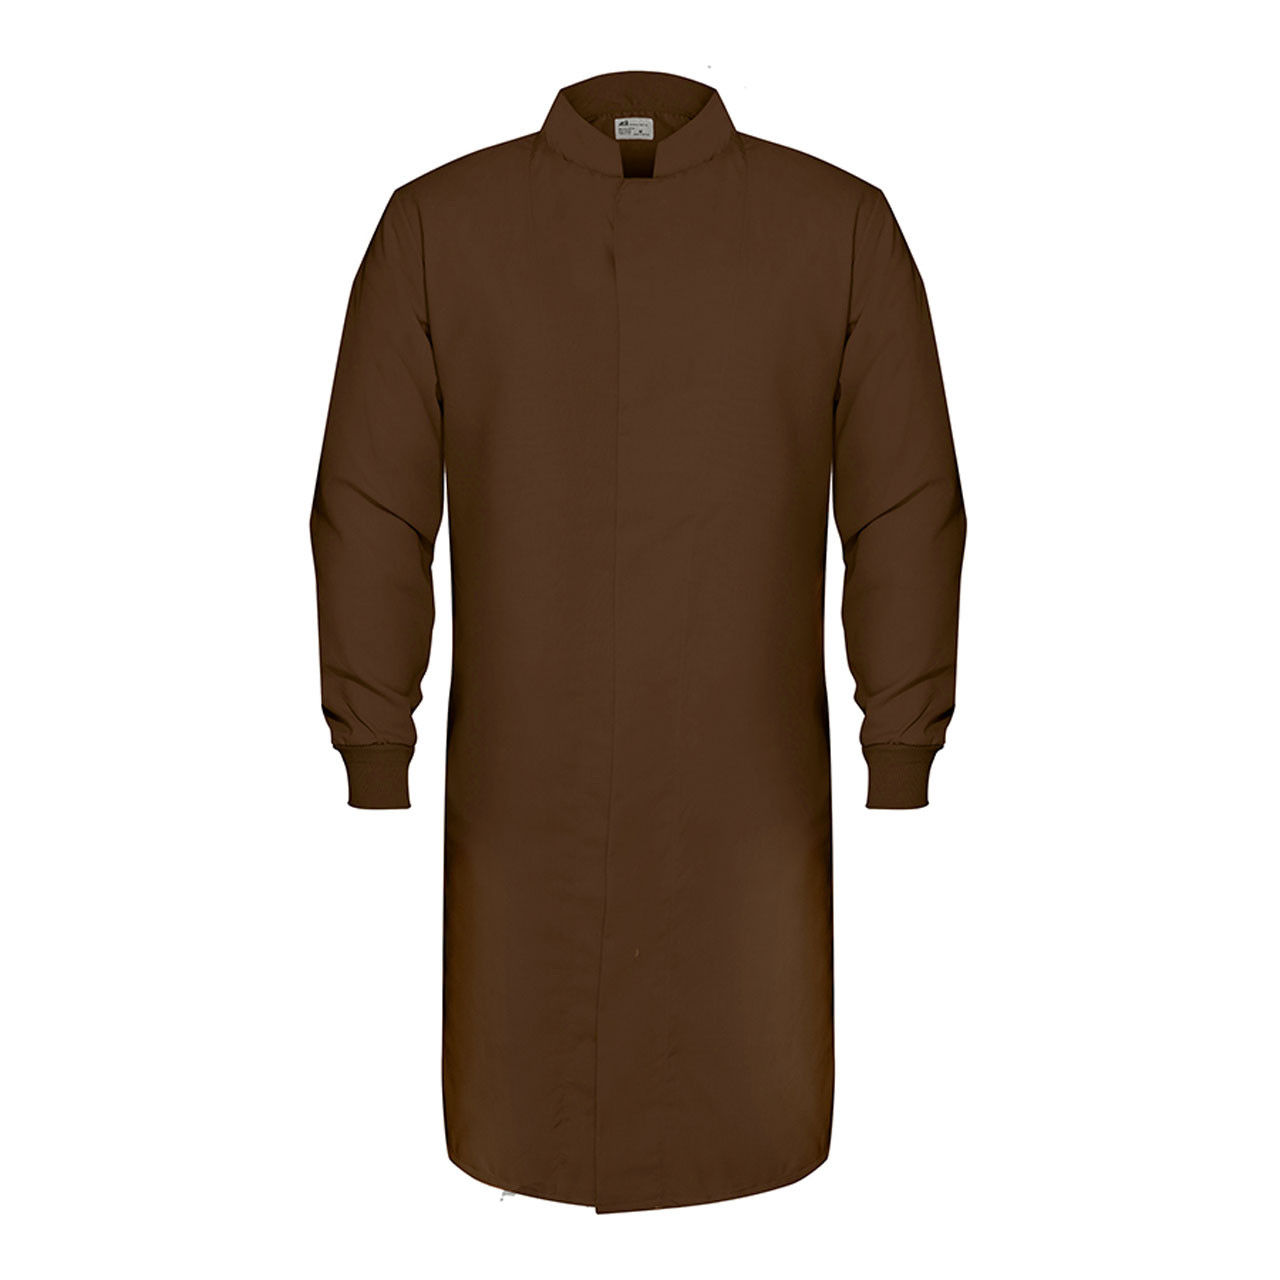 Is this brown lab coat suitable for operating room use?